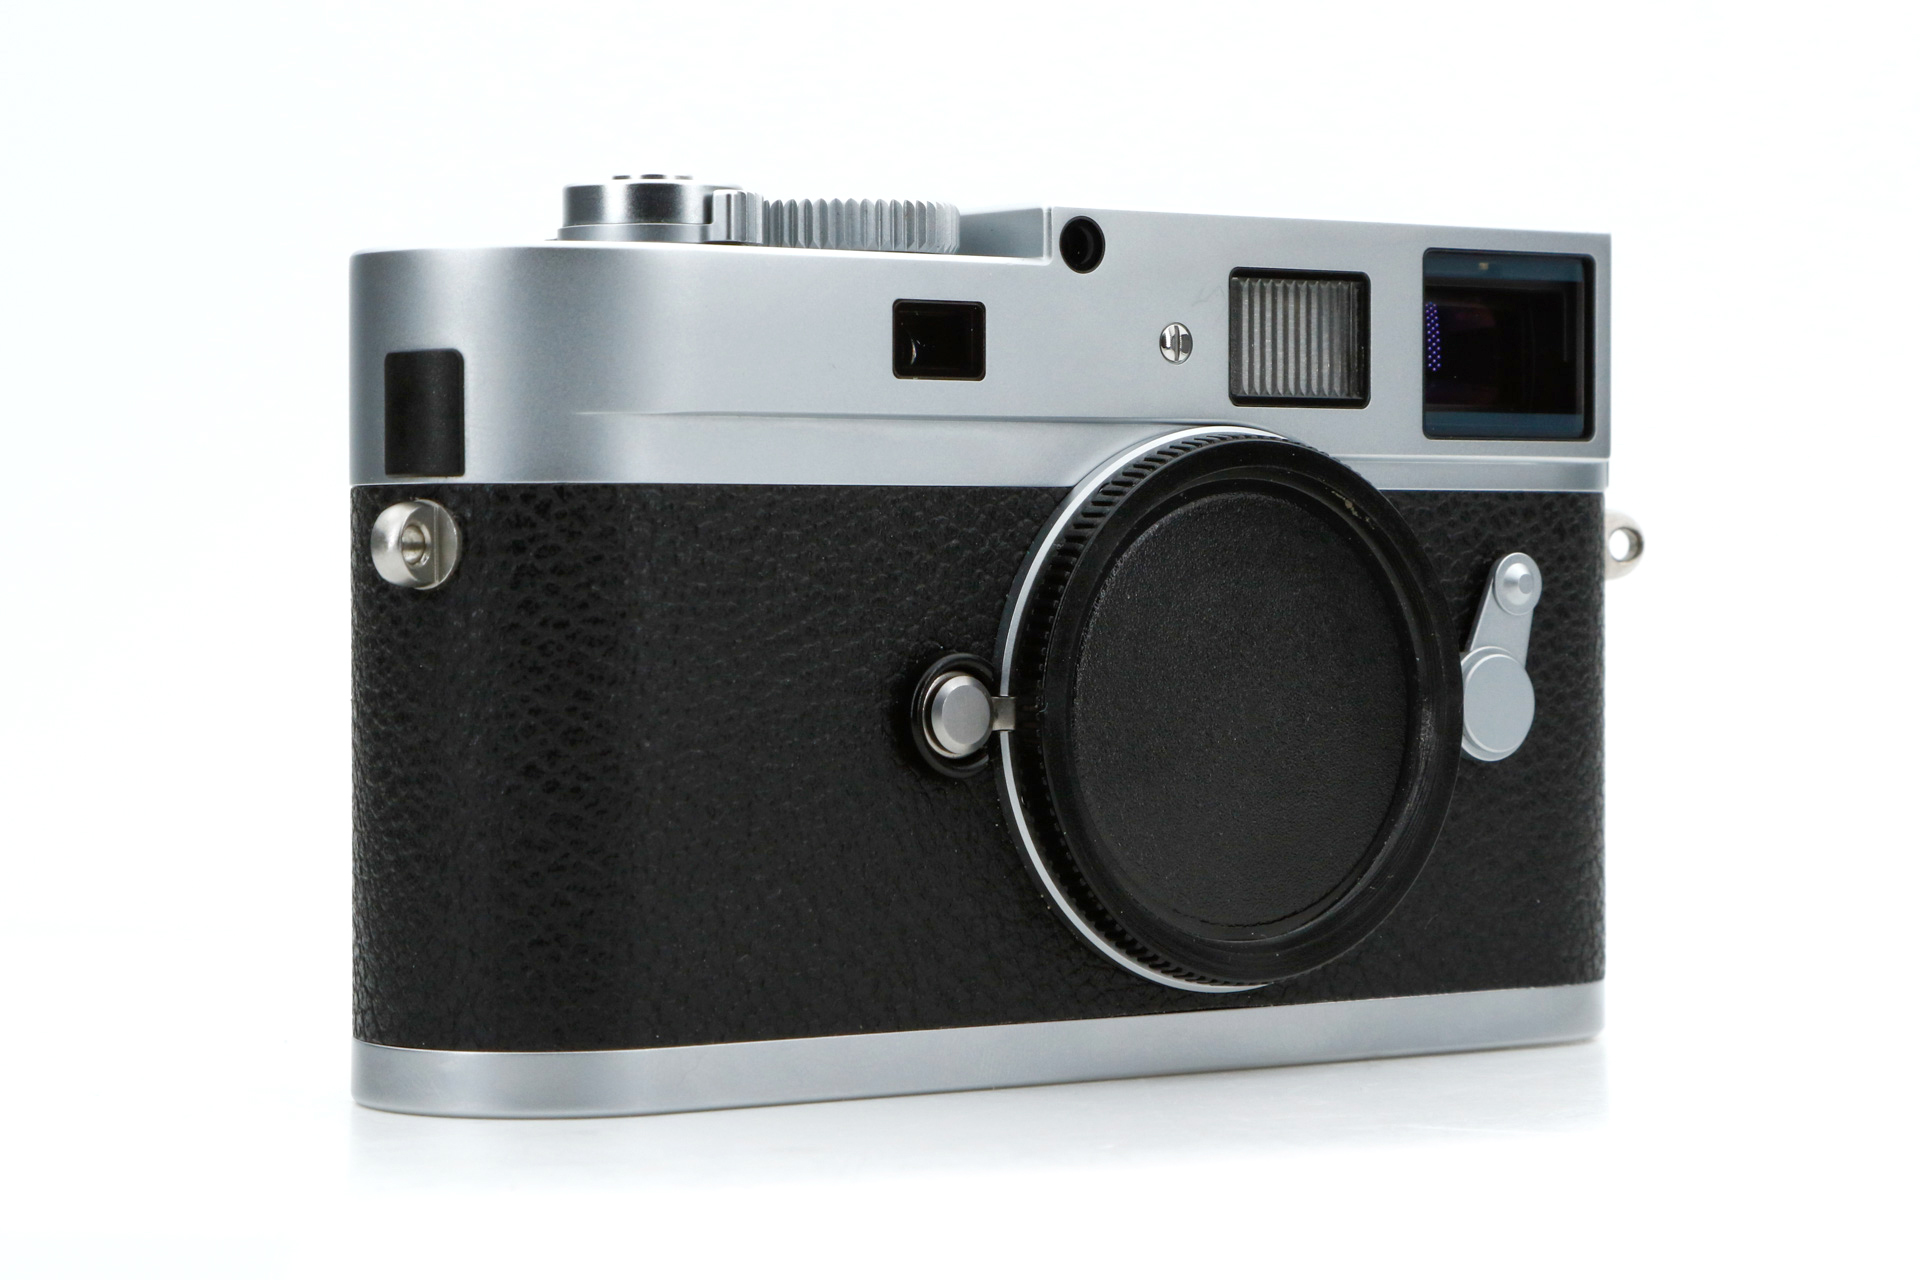 LEICA M9-P, silver with original packaging